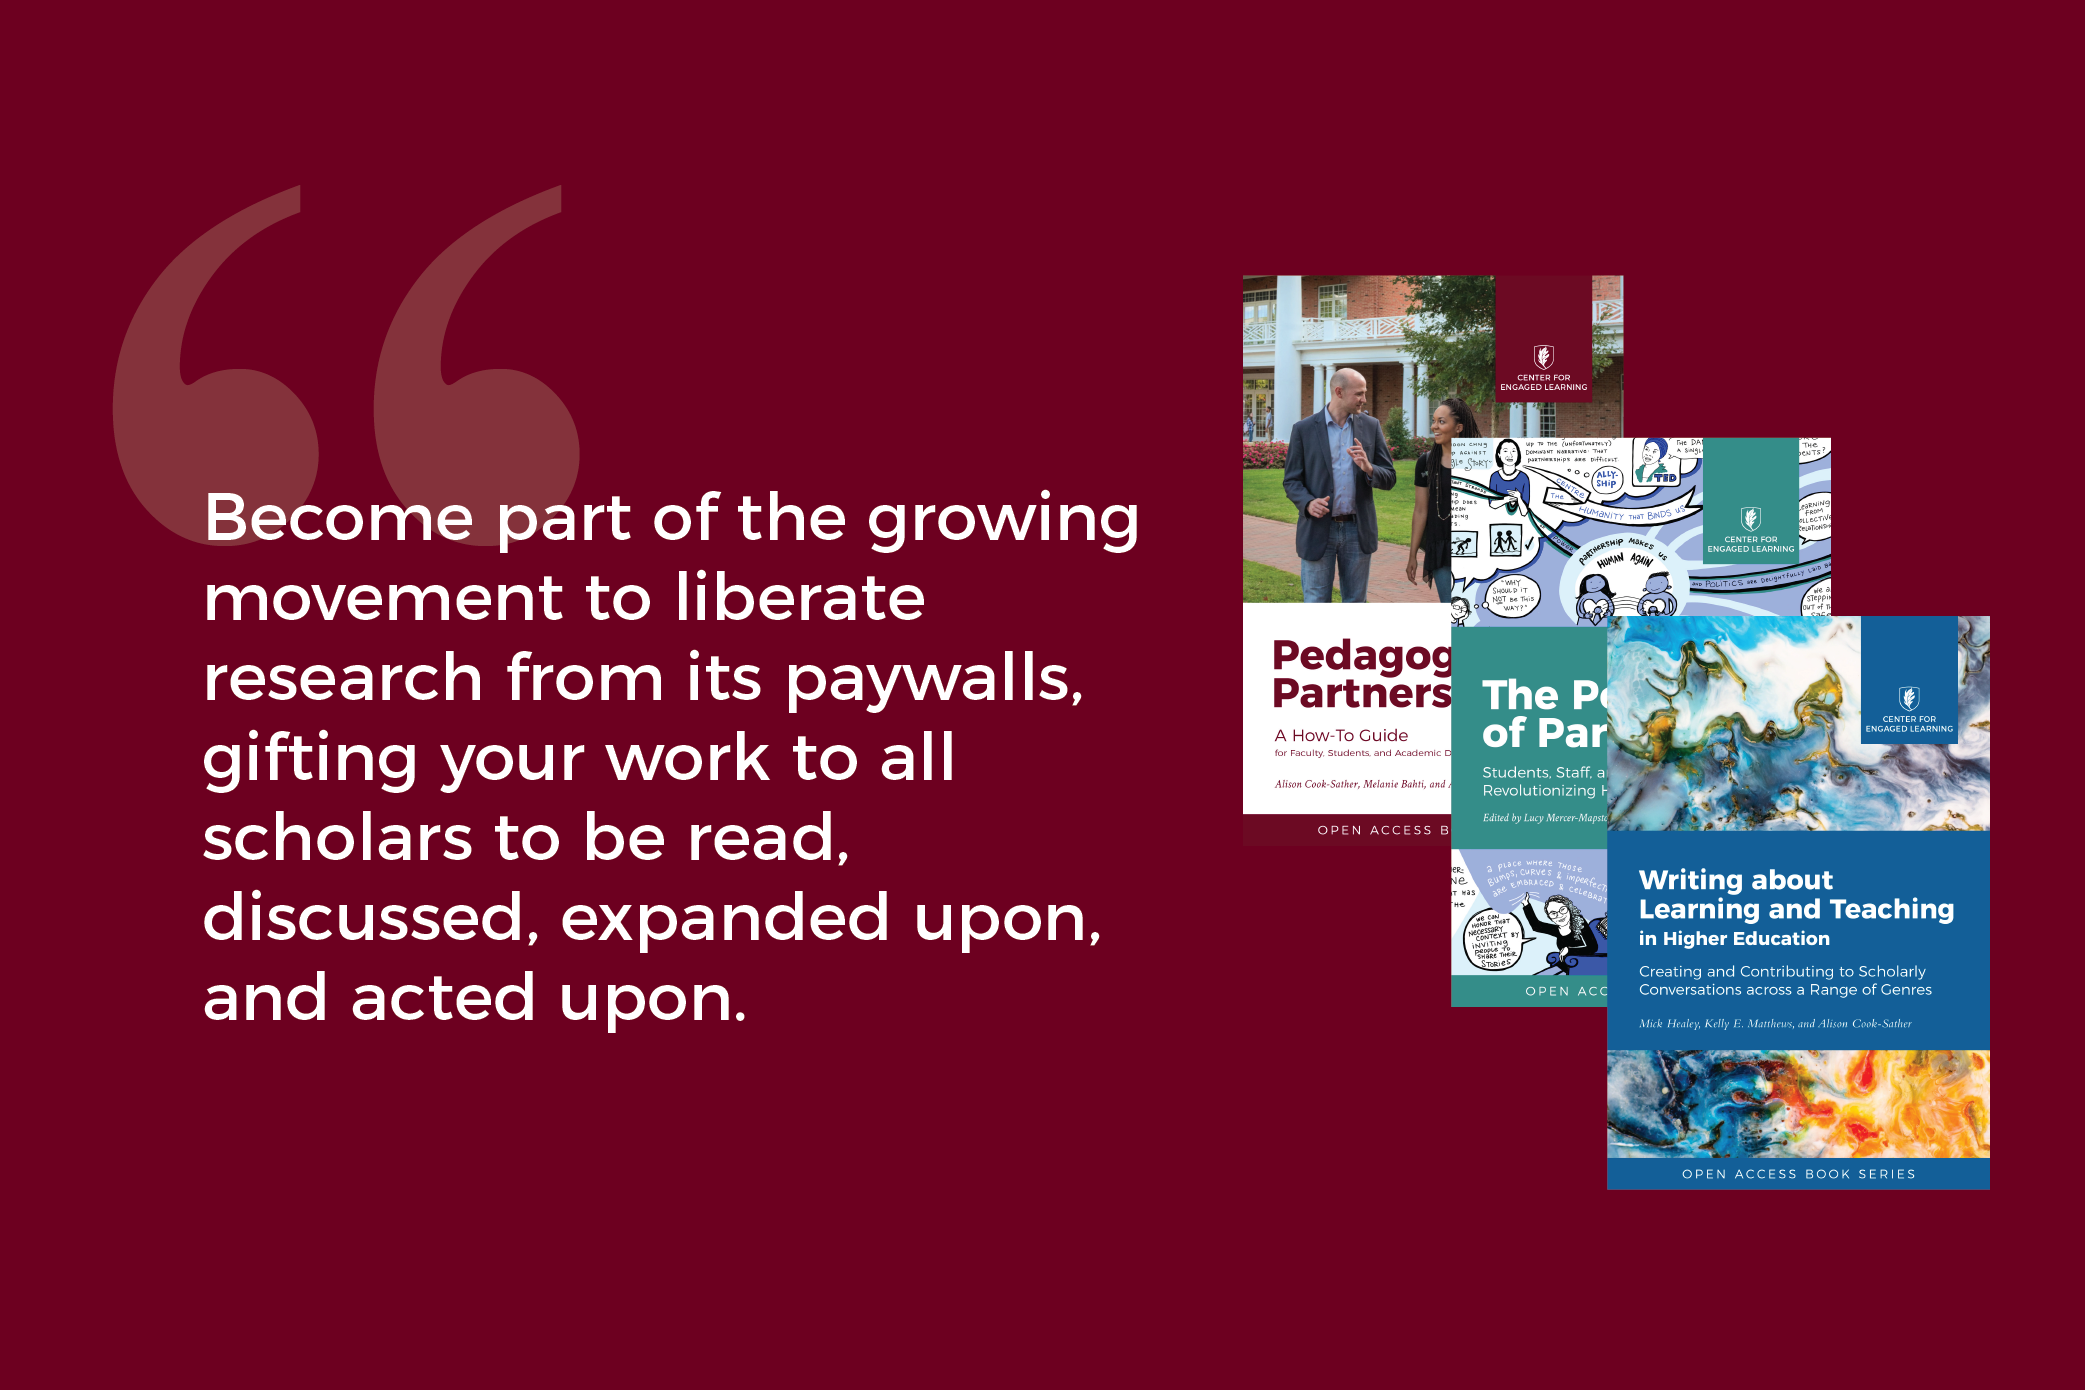 "Become part of the growing movement to liberate research from its paywalls, gifting your work to all scholars to be read, discussed, expanded upon, and acted upon."